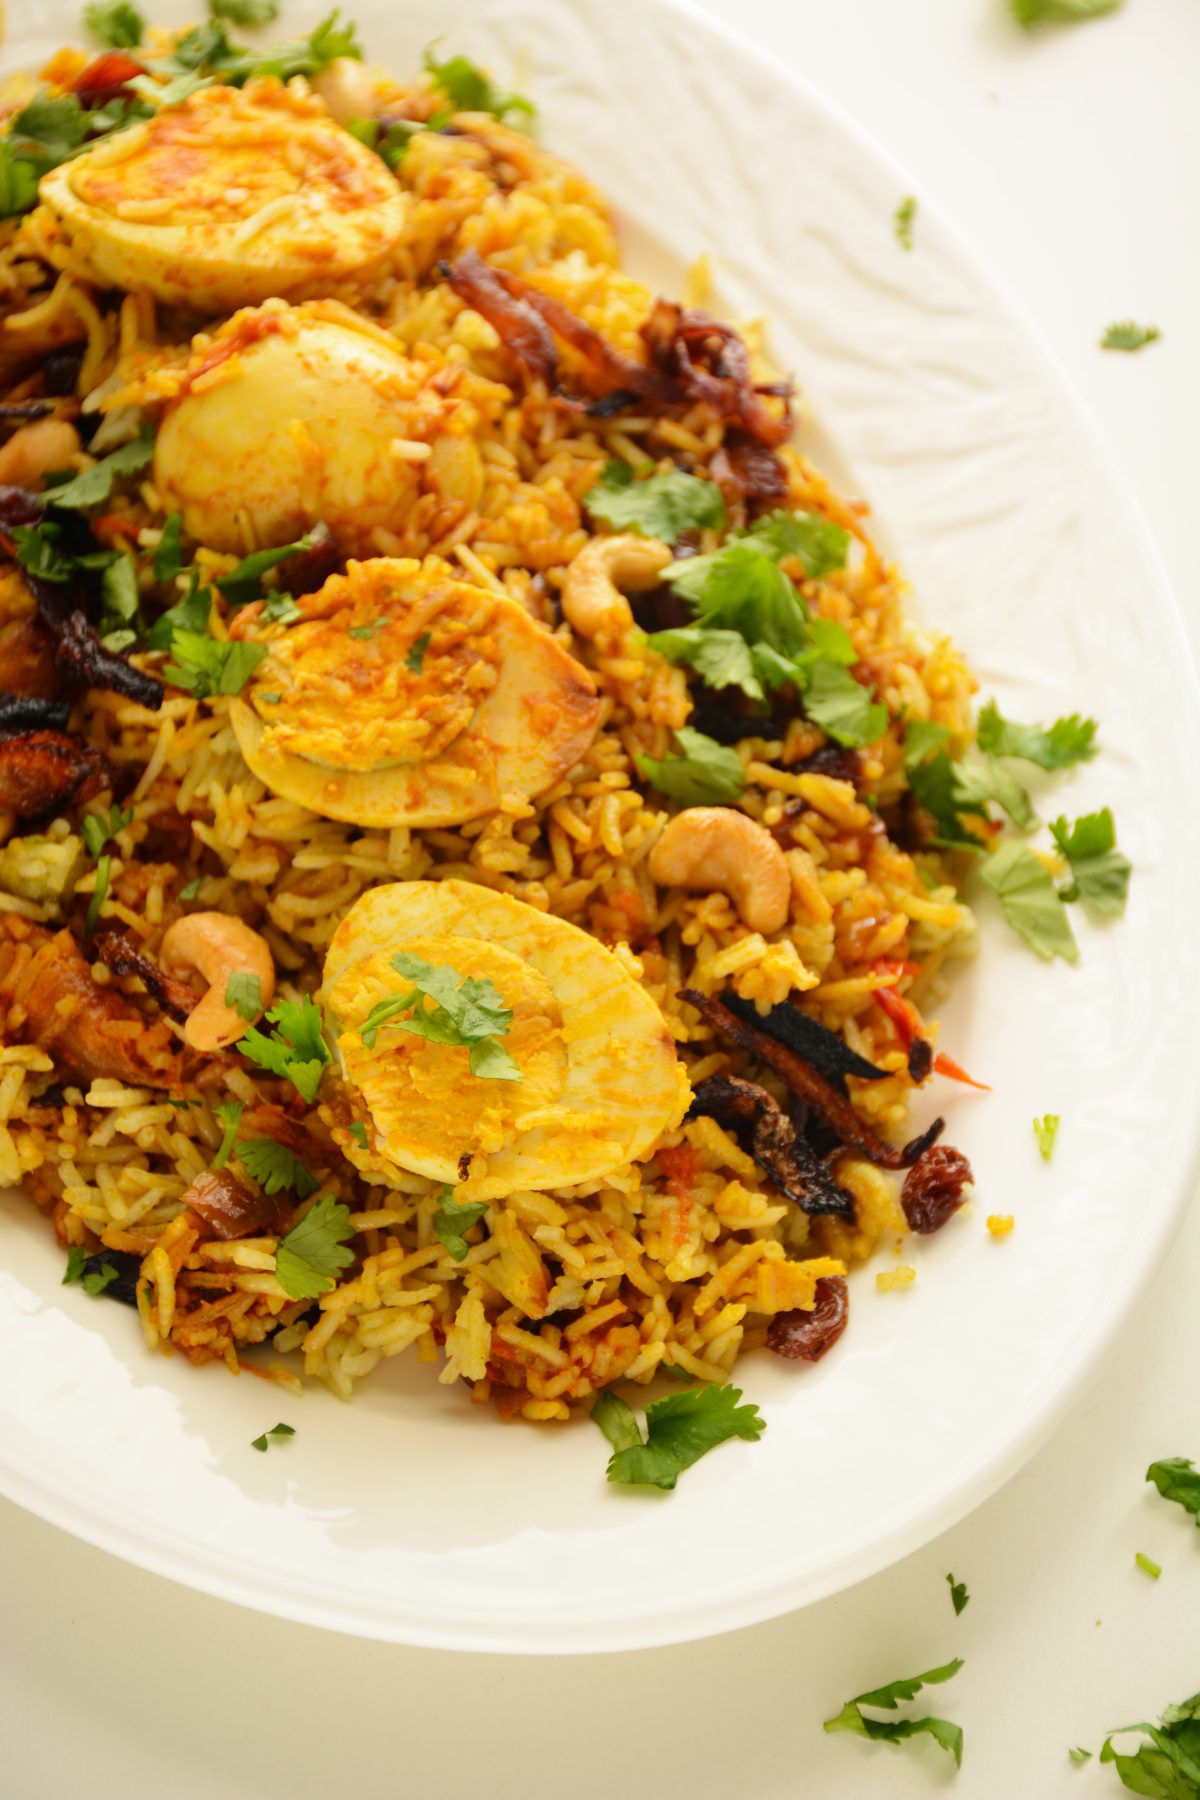 Egg biryani - an aromatic, mildly spiced fragrant rice dish from India - thespiceadventuress.com